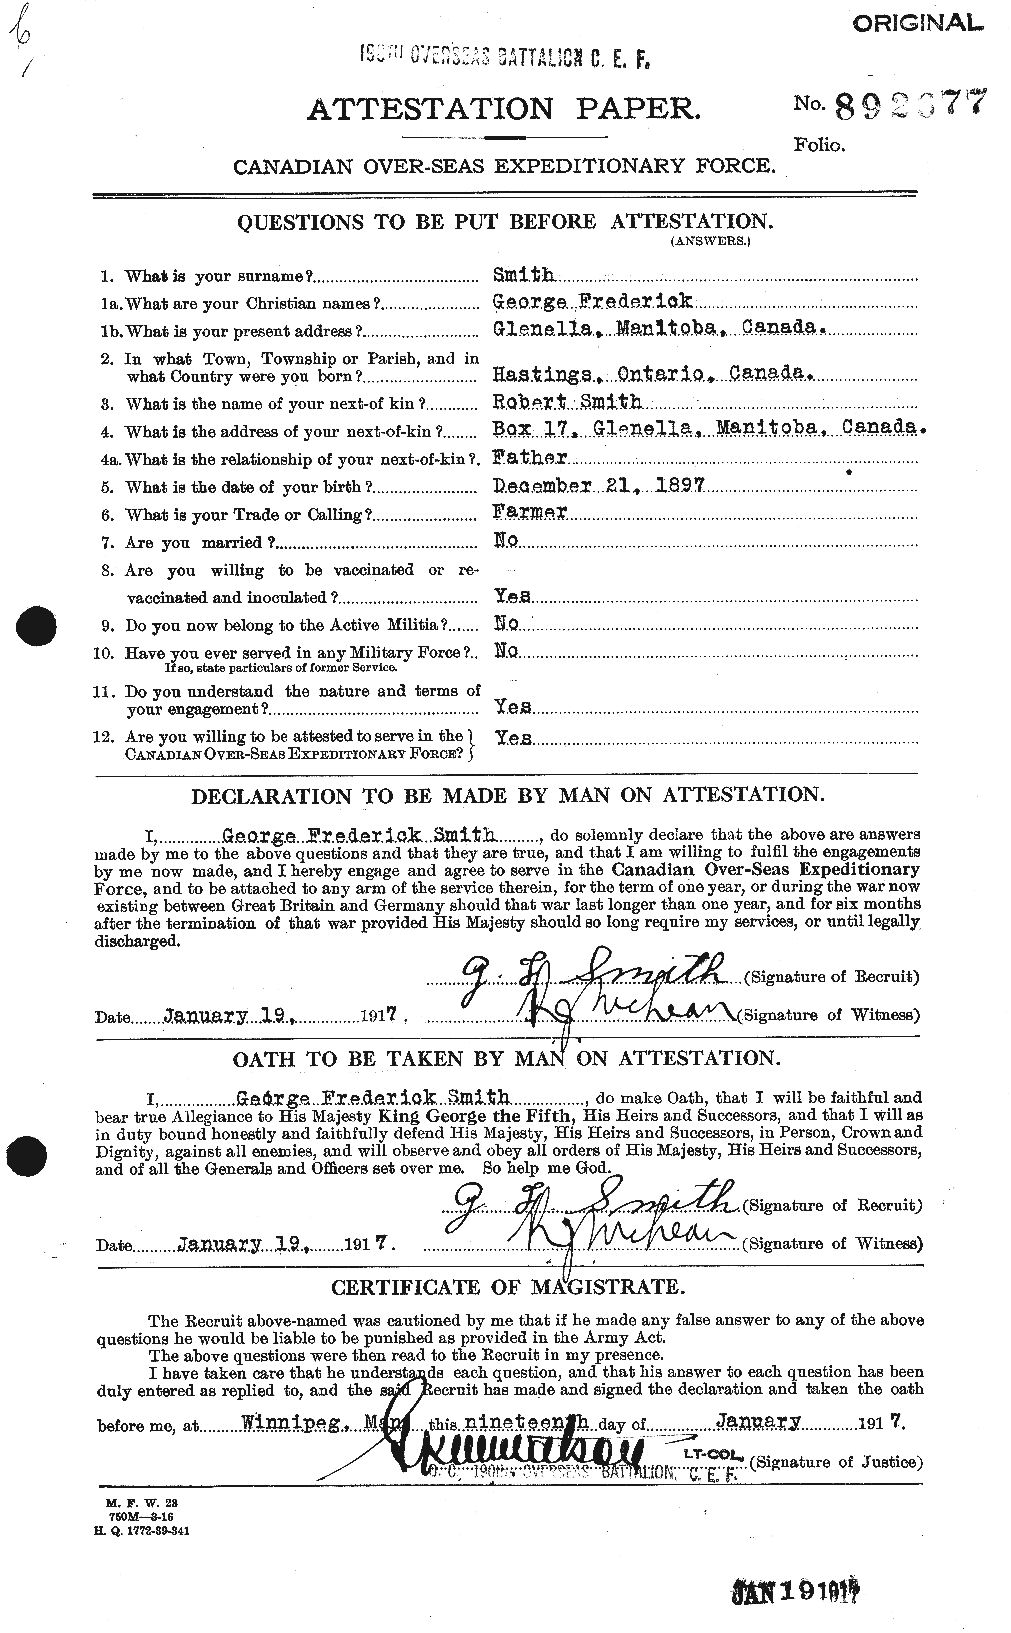 Personnel Records of the First World War - CEF 102369a